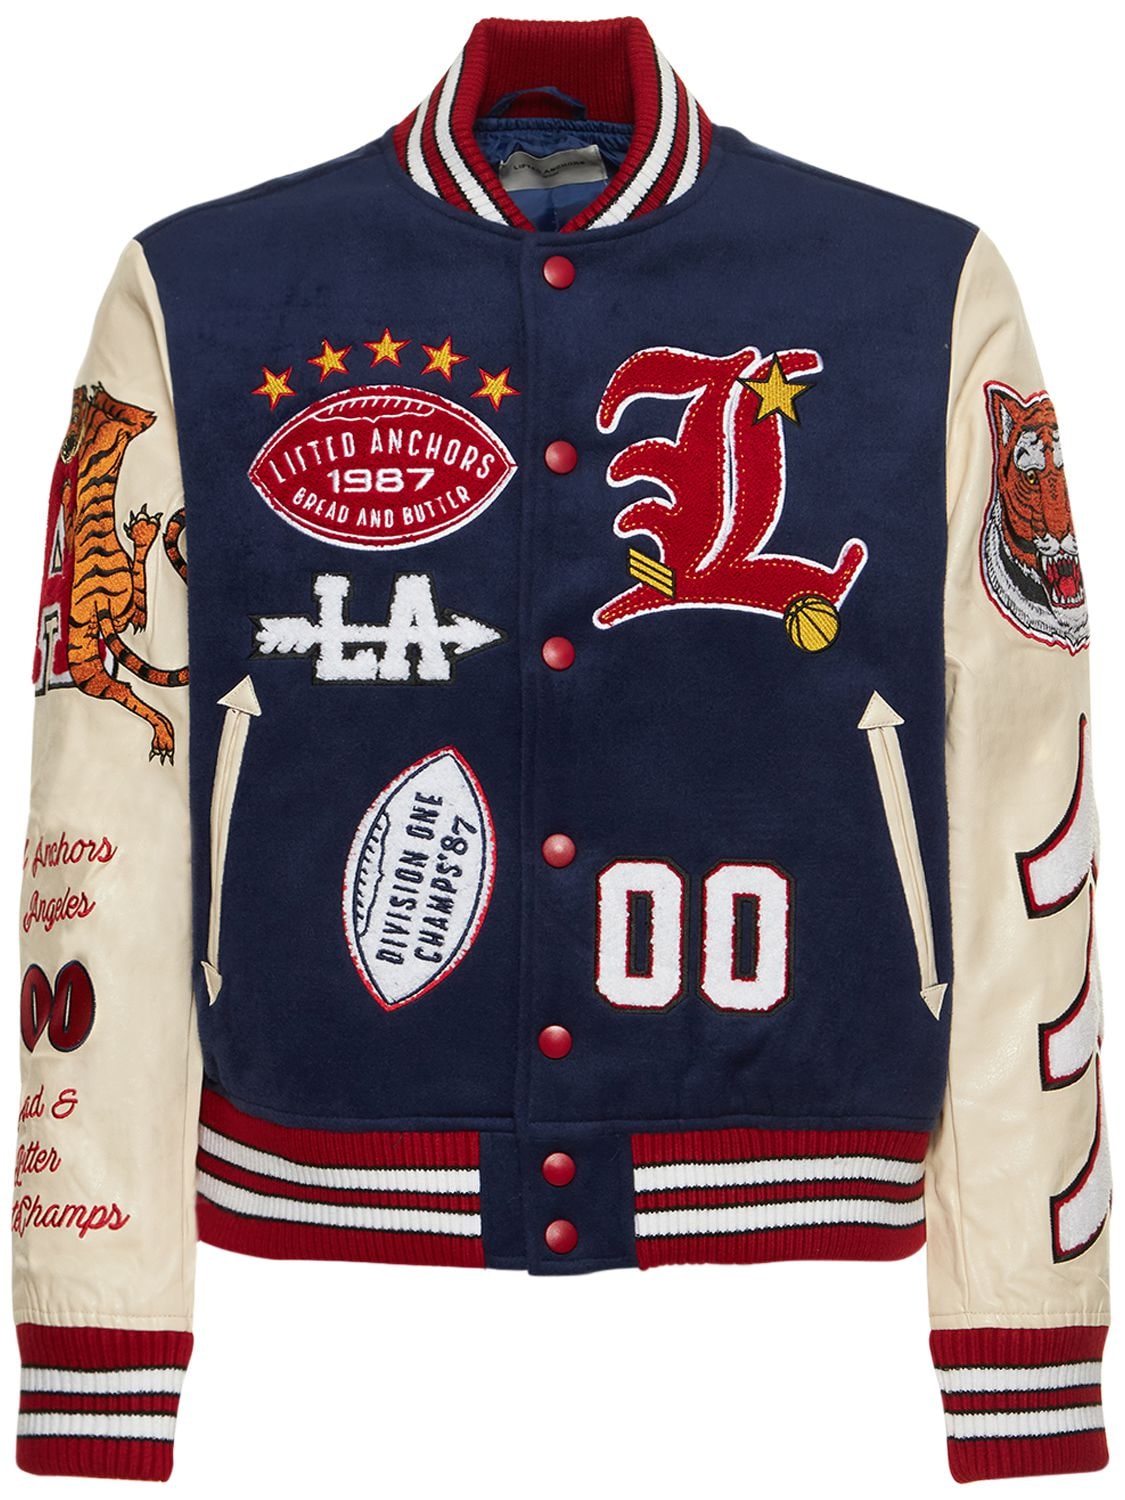 Lifted Anchors Champion Letterman Varsity Jacket In Blue,red